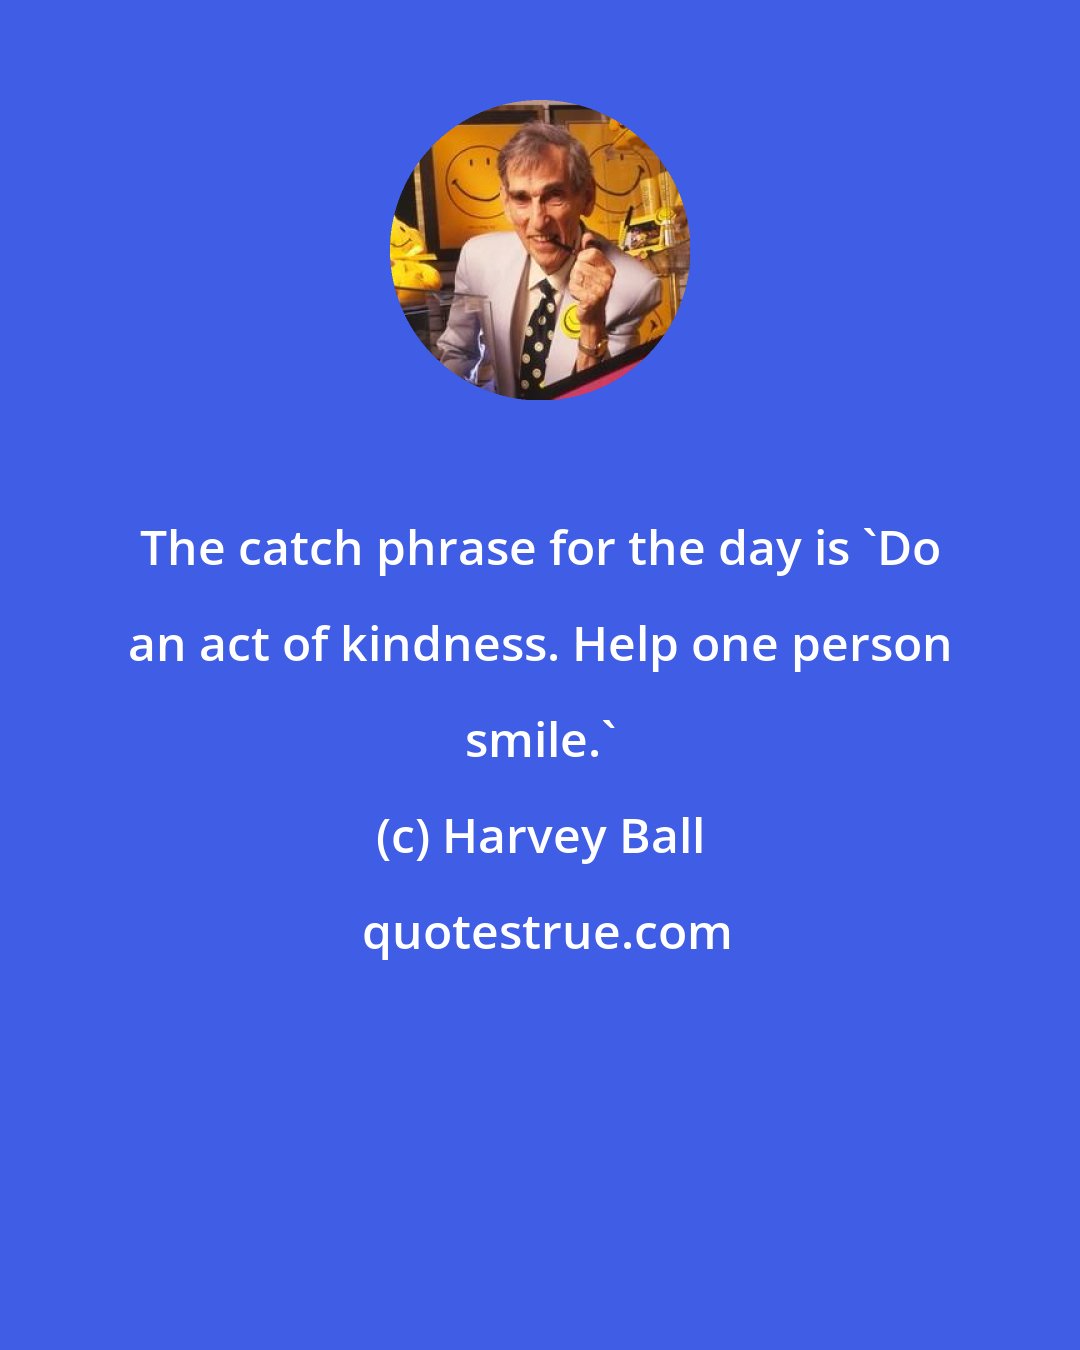 Harvey Ball: The catch phrase for the day is 'Do an act of kindness. Help one person smile.'